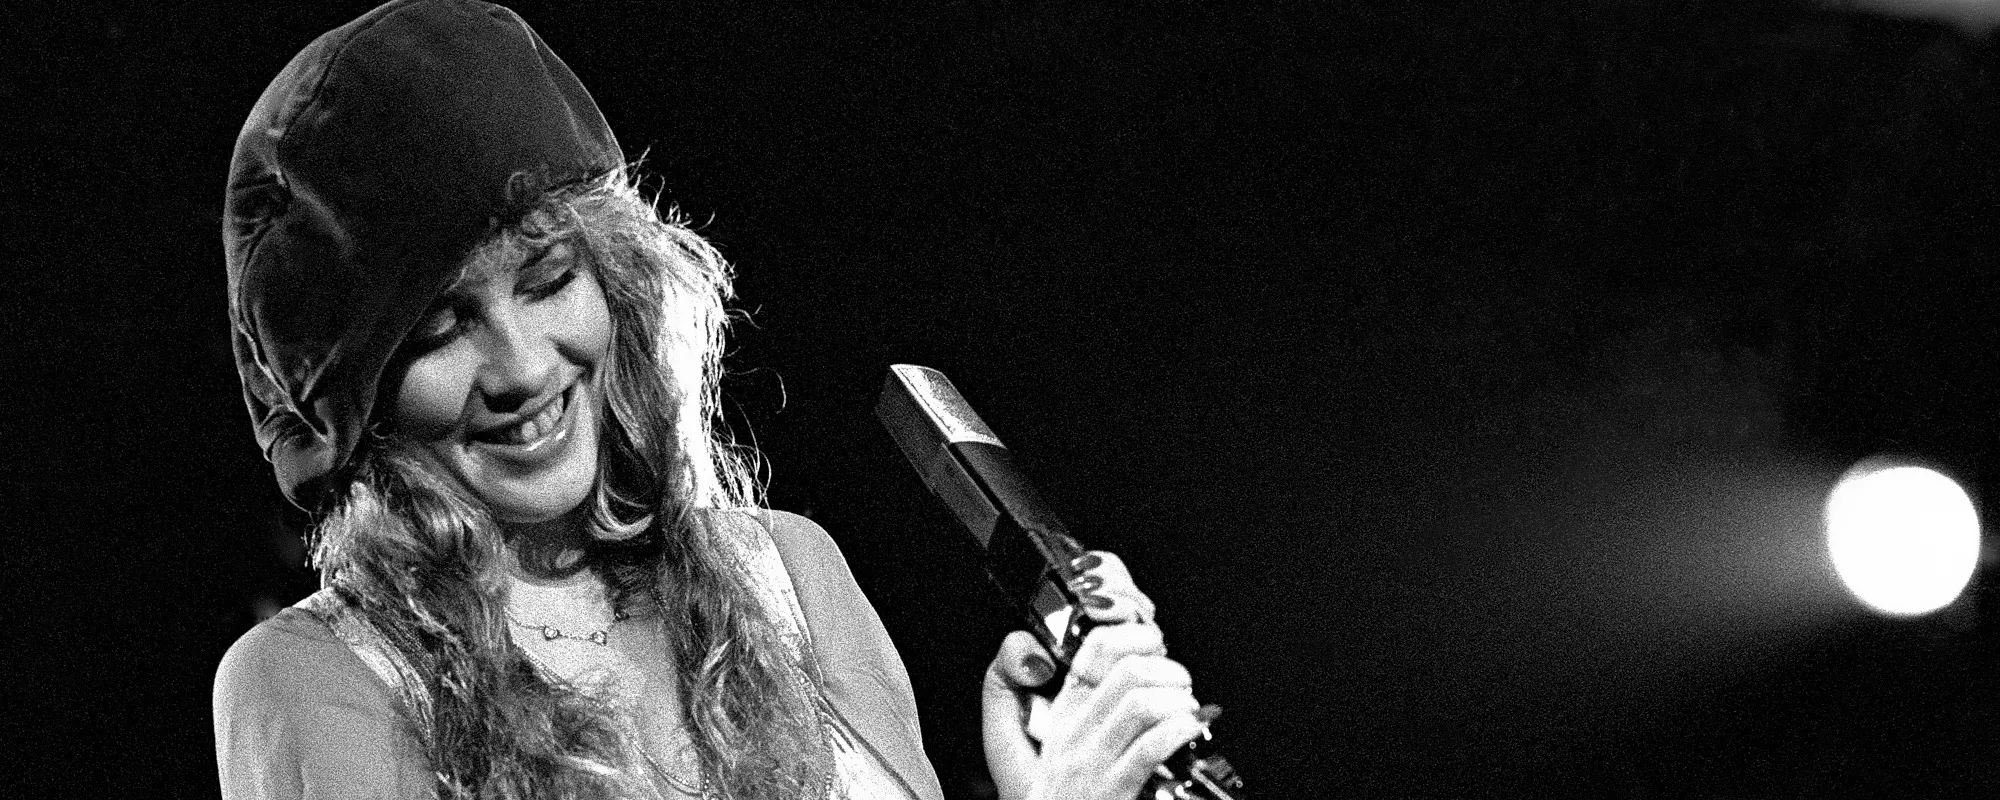 5 Stevie Nicks Deep Cuts That Should Have Been Singles